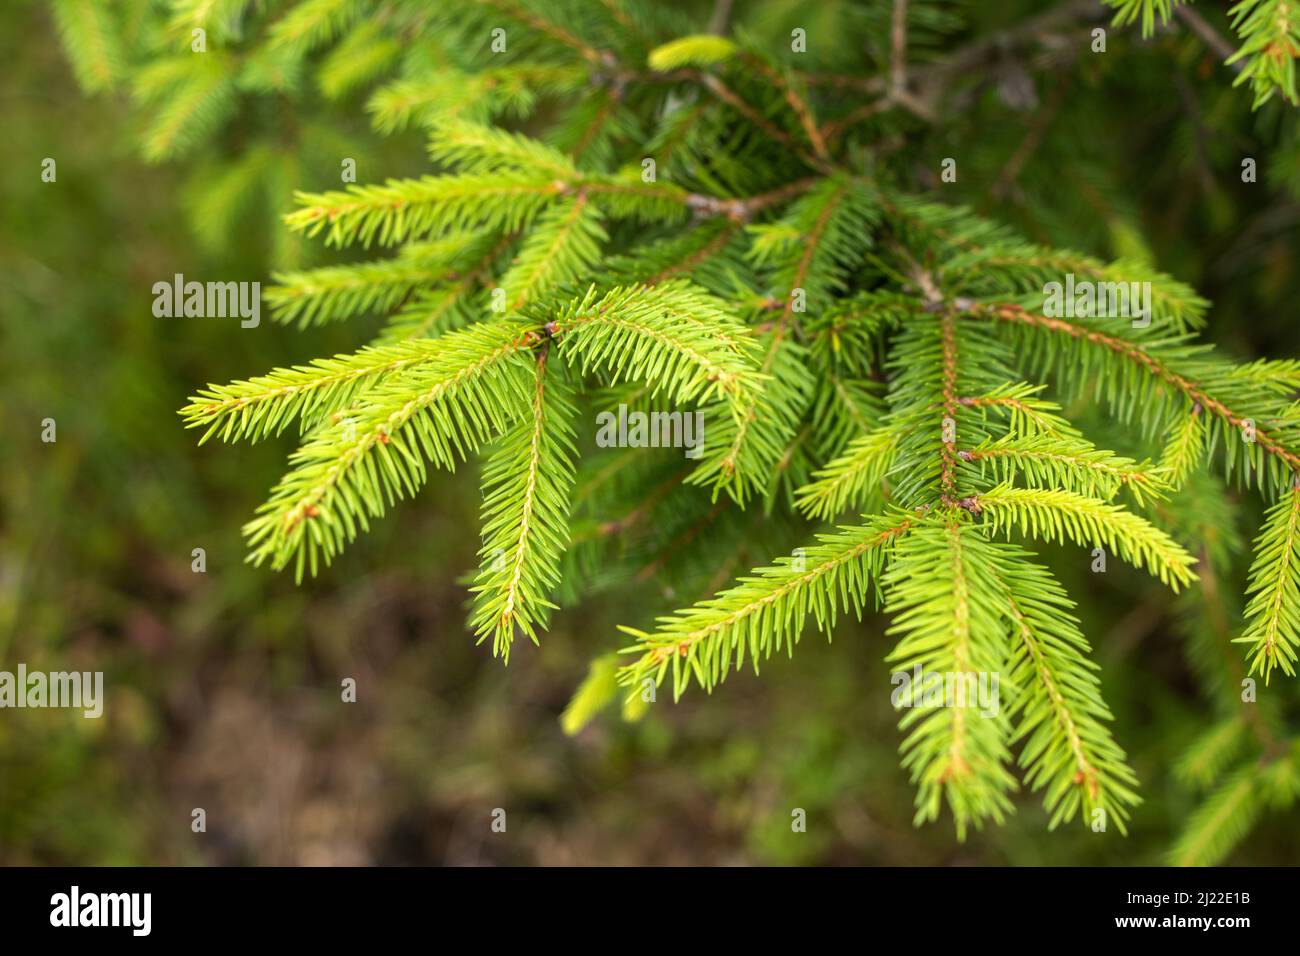 Norway spruce, or European spruce. coniferous tree, type species of the genus Spruce of the Pine family. Stock Photo